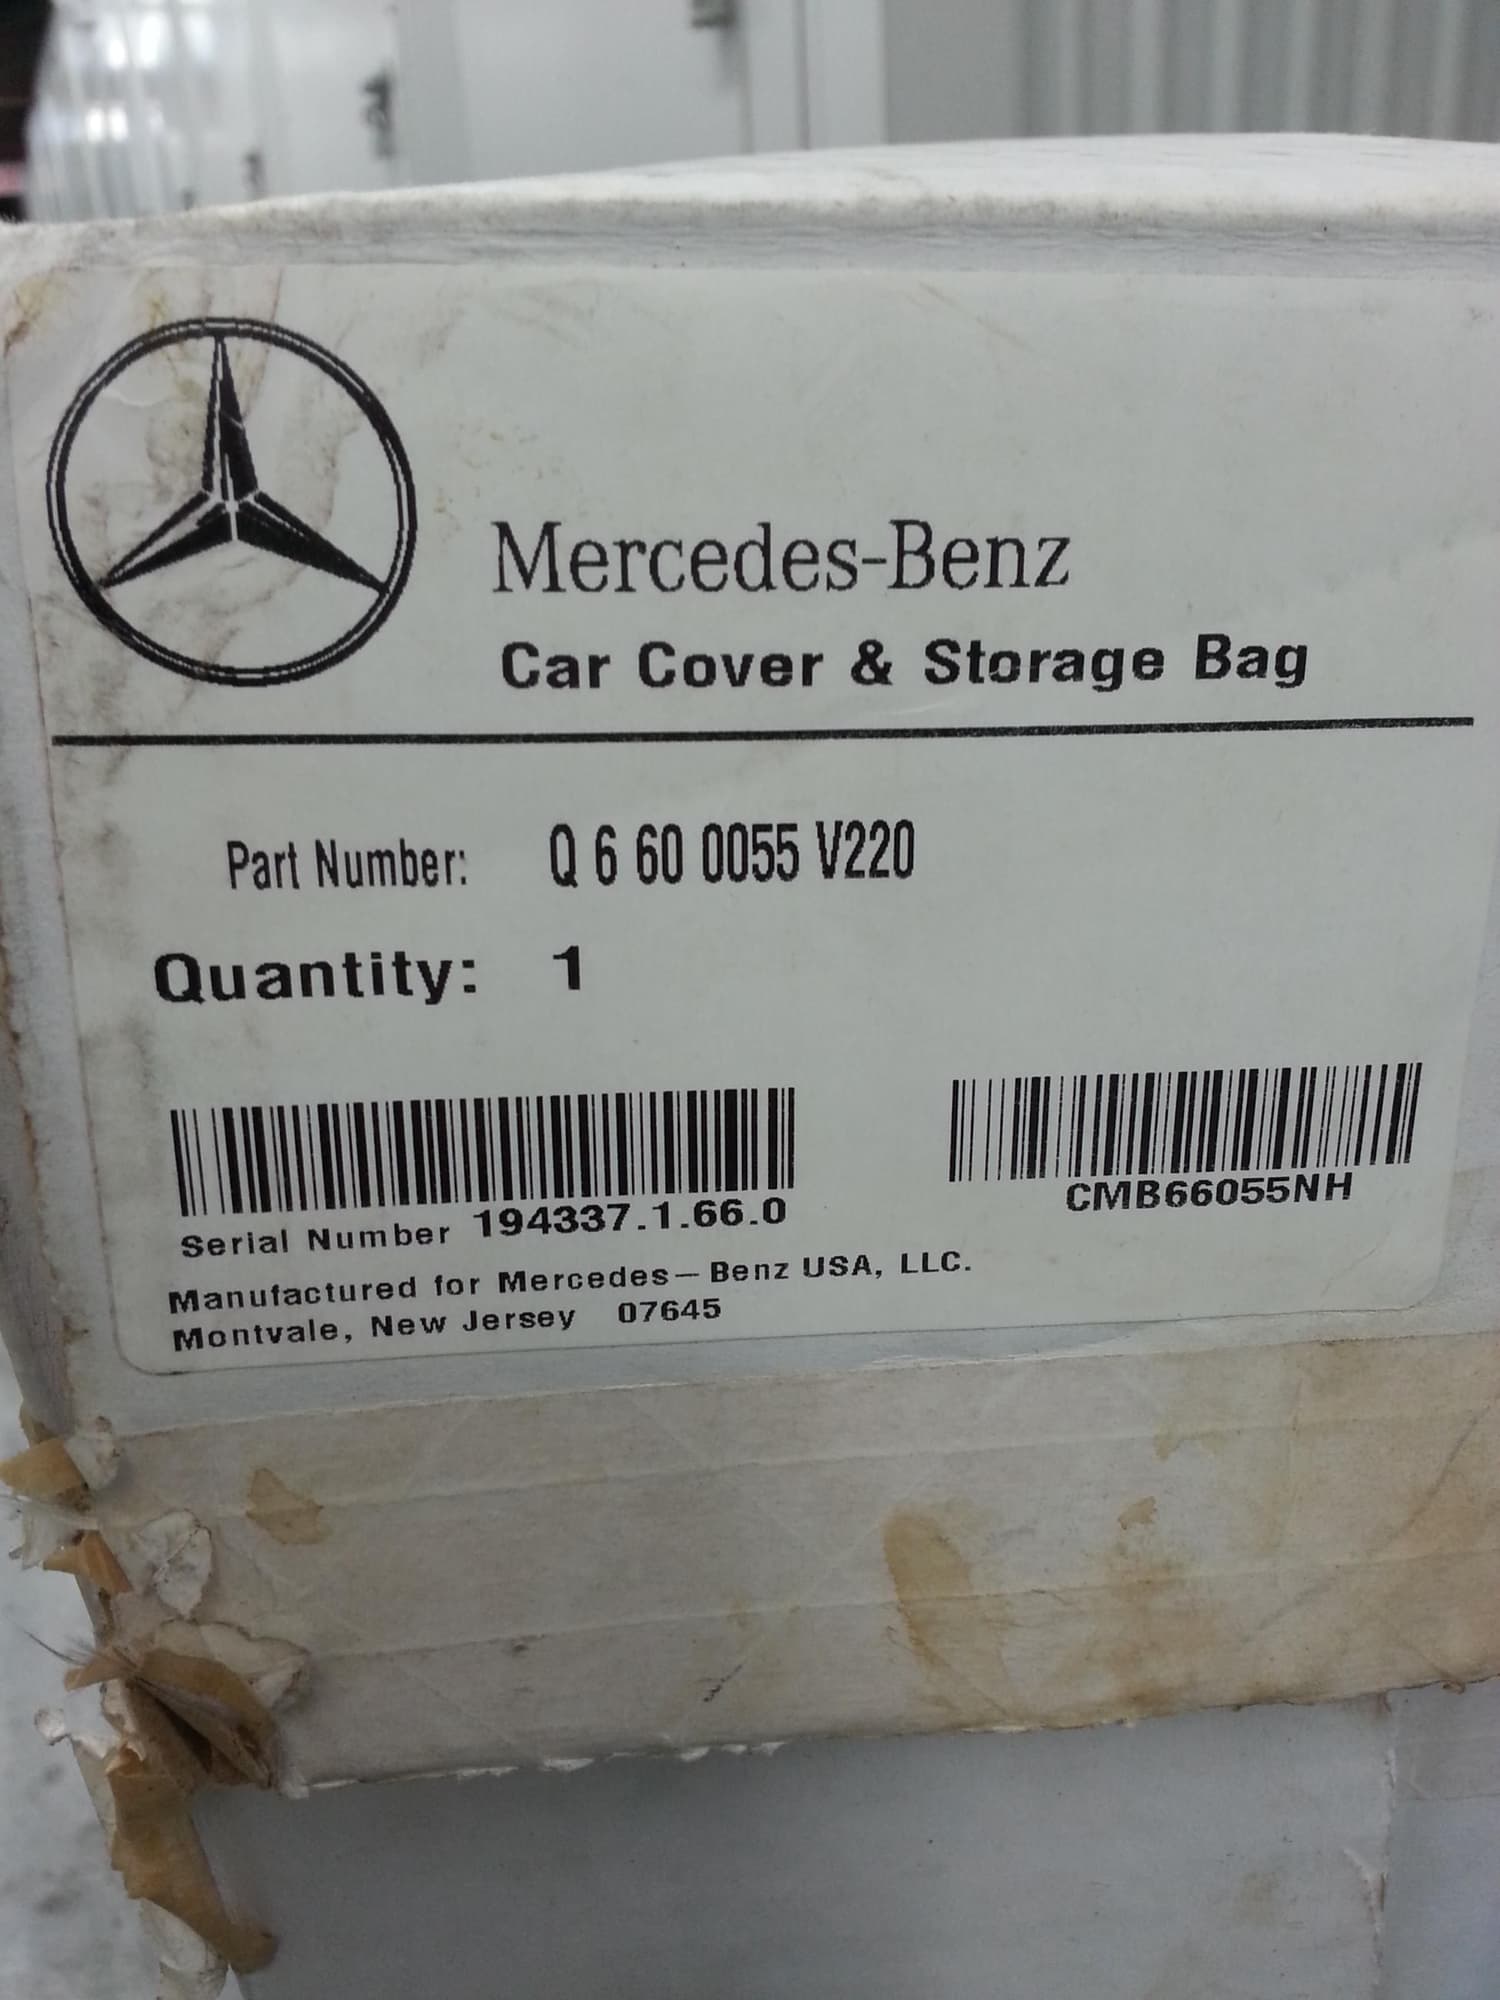 Exterior Body Parts - FS: Used OEM W220 car cover. - Used - Queens, NY 11415, United States